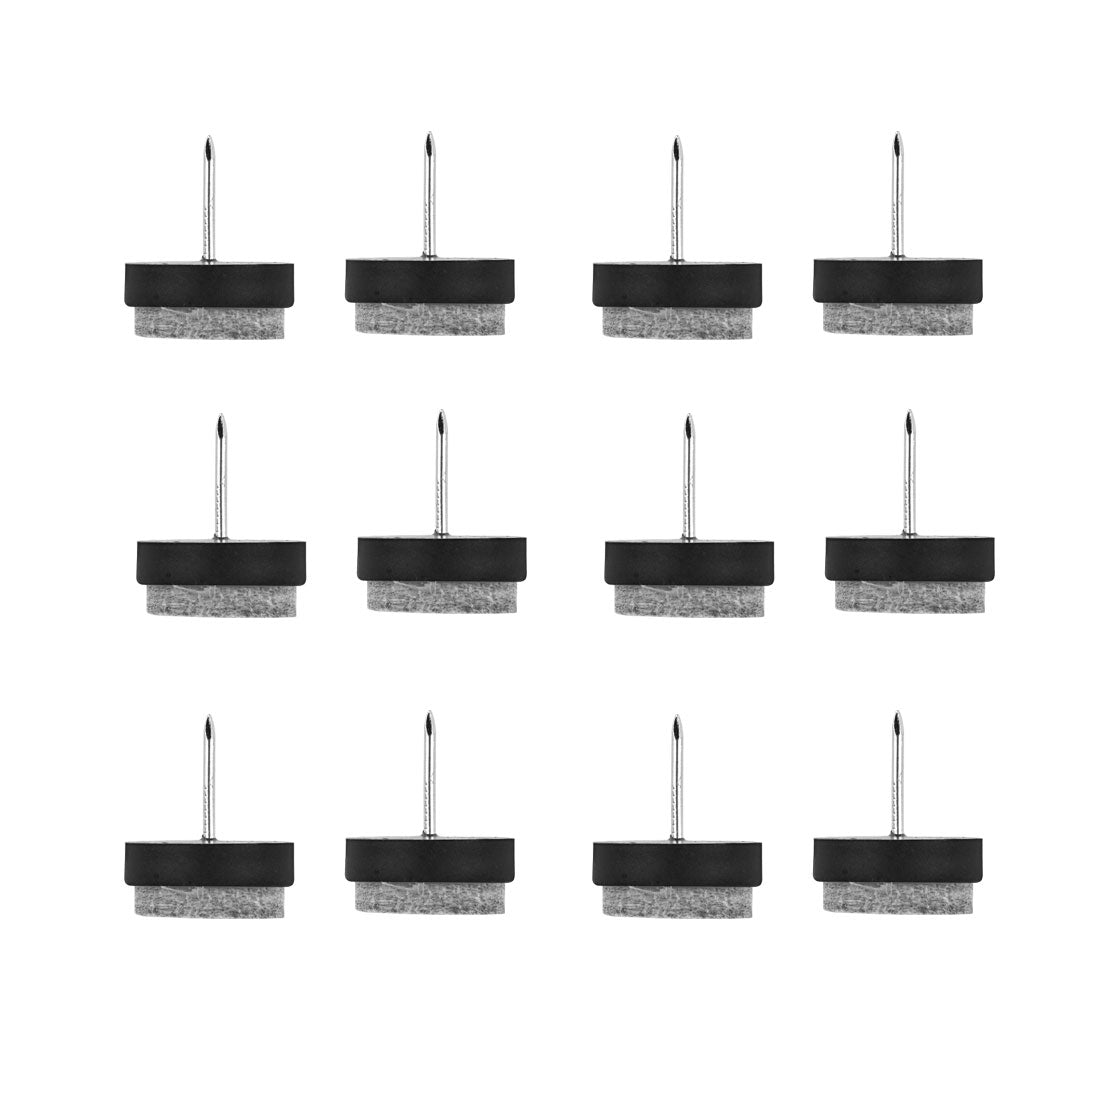 uxcell Uxcell Felt Pad Nails Glides Floor Protector Reduces Noise Anti-scratch Anti-slip for Furniture Chair Table Leg Feet Black 17mm Dia 12pcs